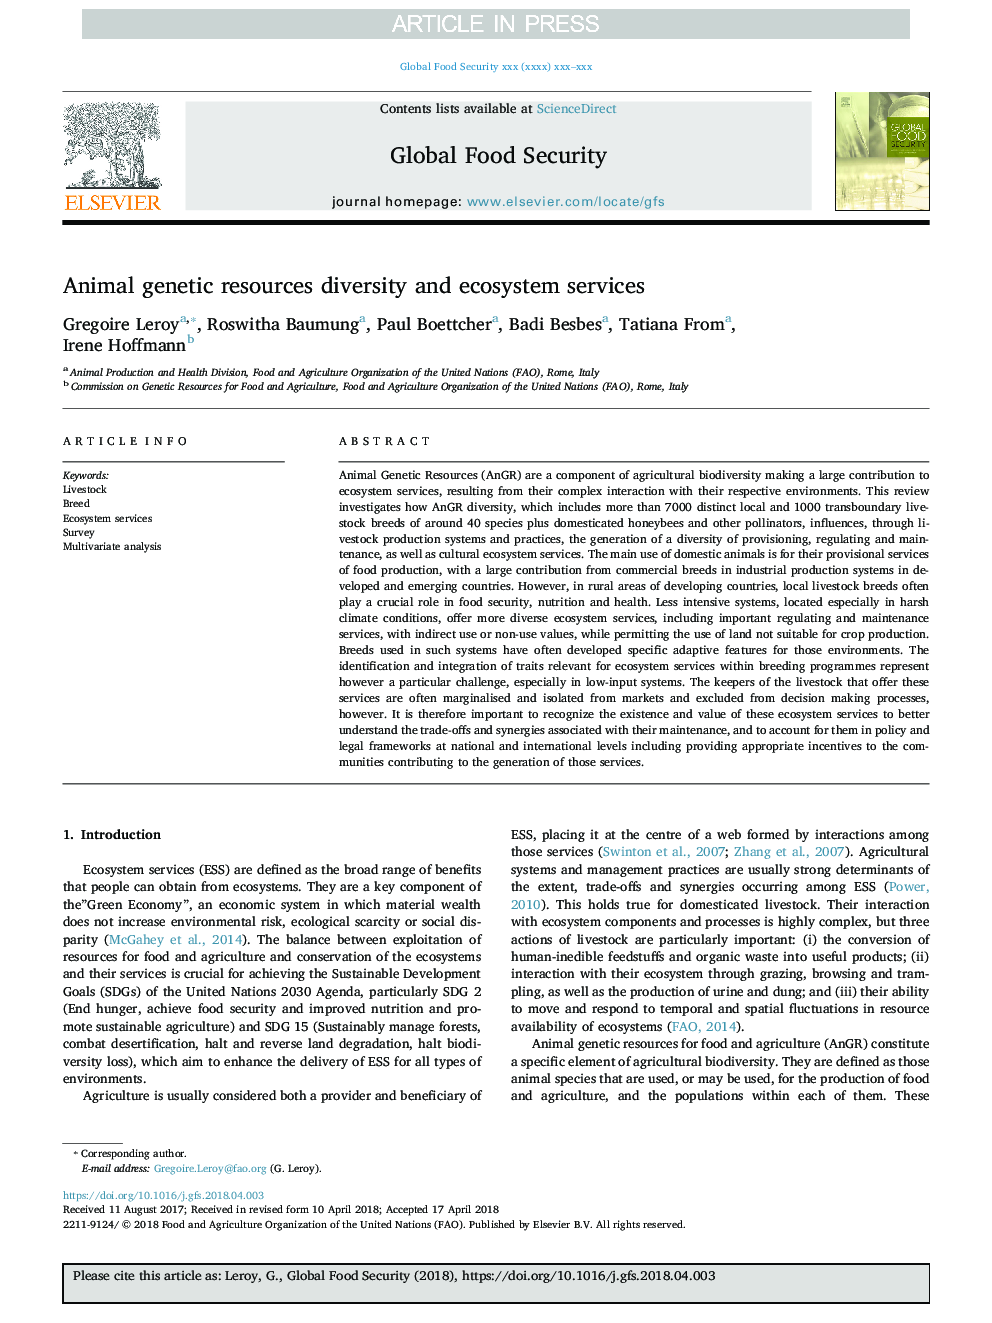 Animal genetic resources diversity and ecosystem services